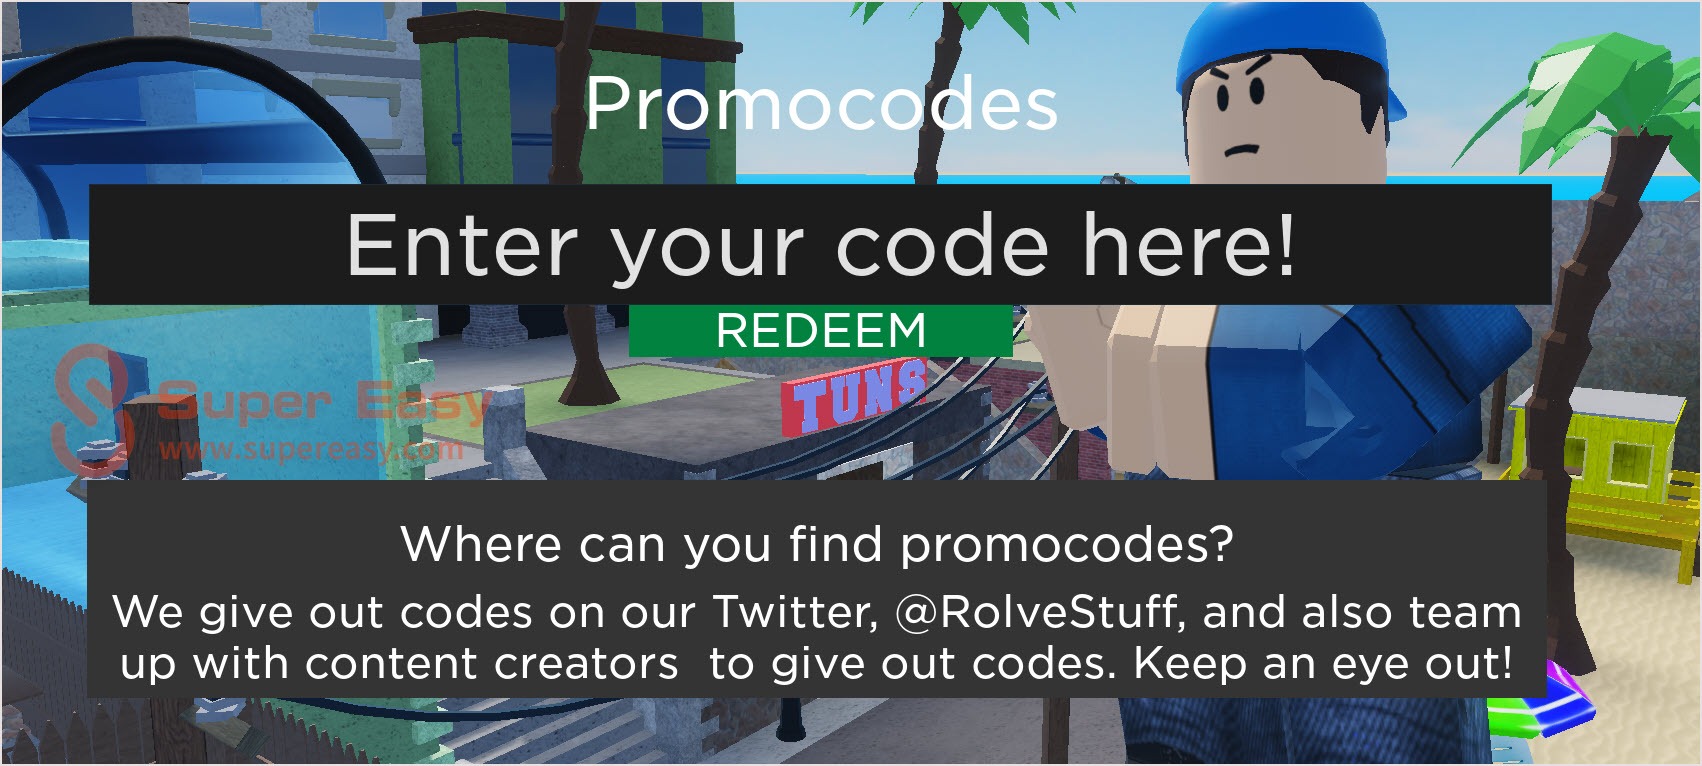 New Roblox Arsenal All Working Codes (January 2021) - Super Easy